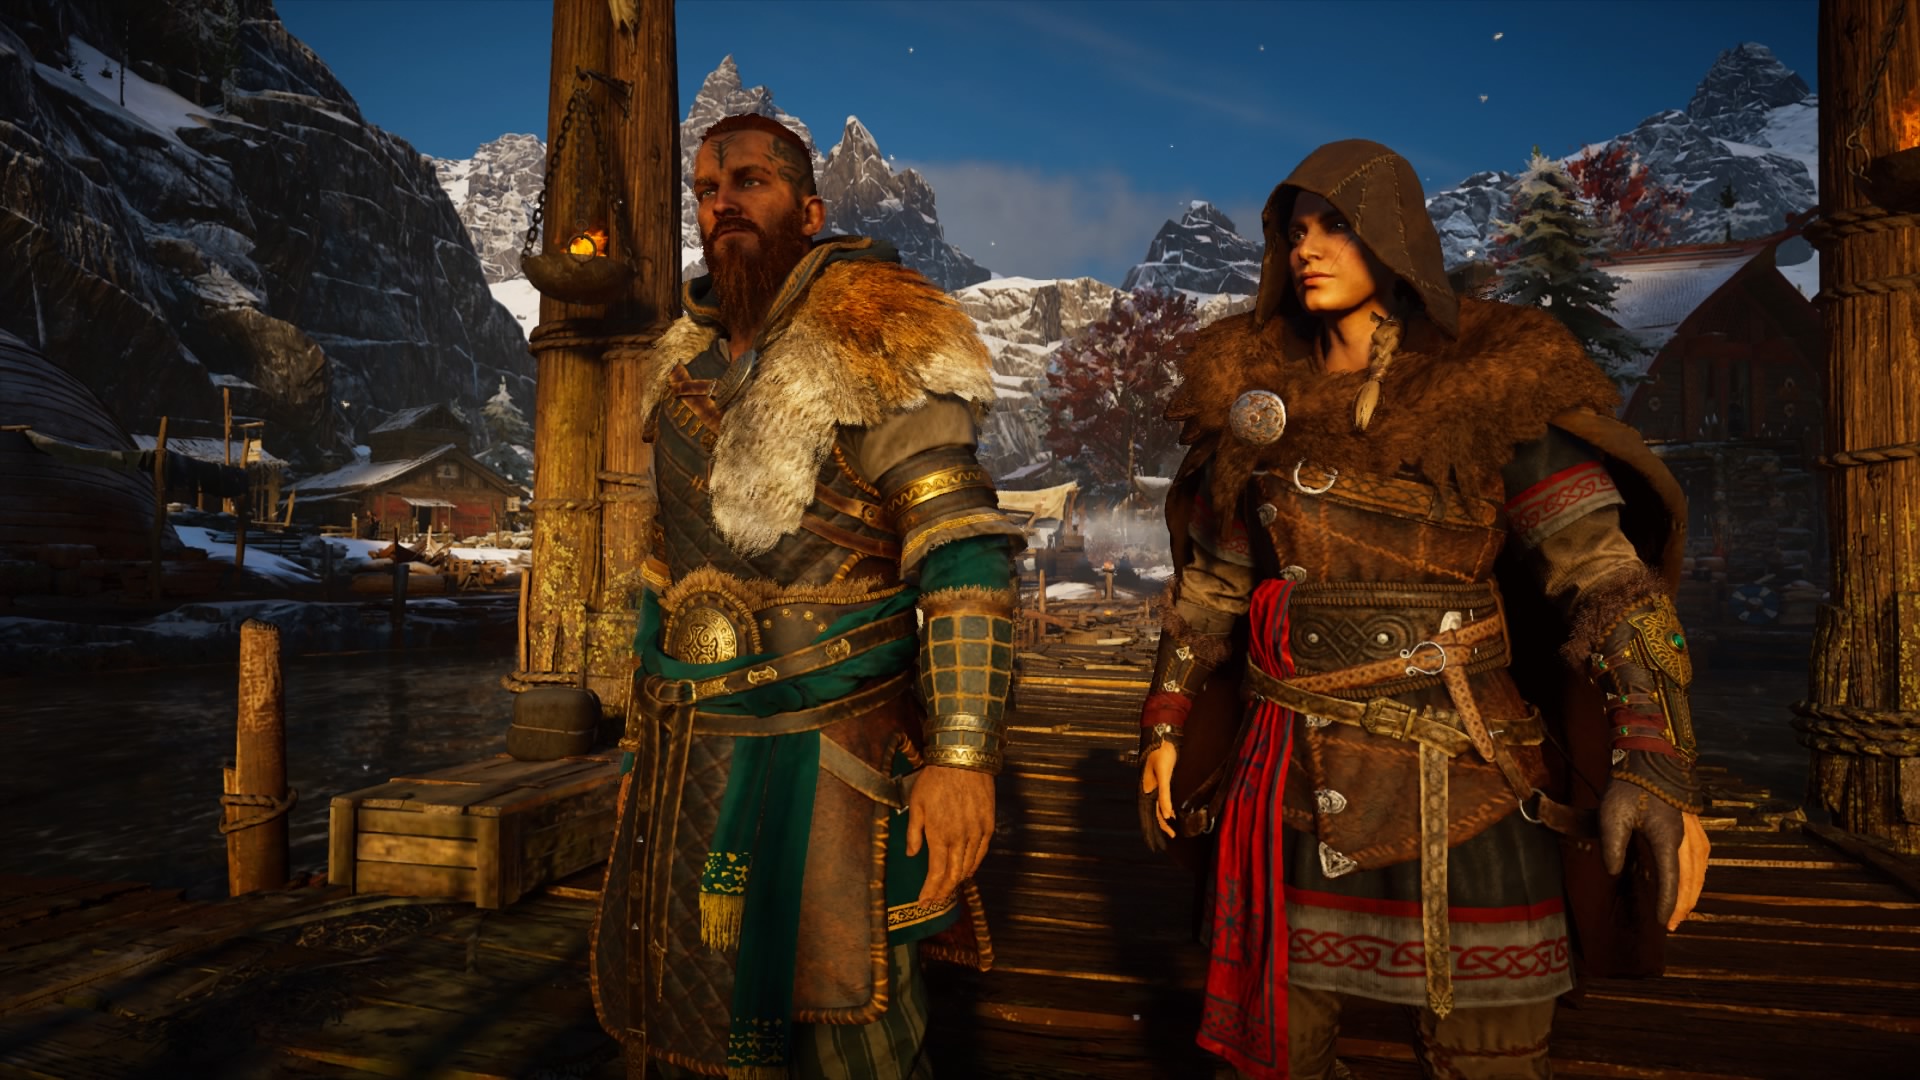 Assassin's Creed Valhalla' Gameplay Preview: Settlements & Dual-Shield Fun